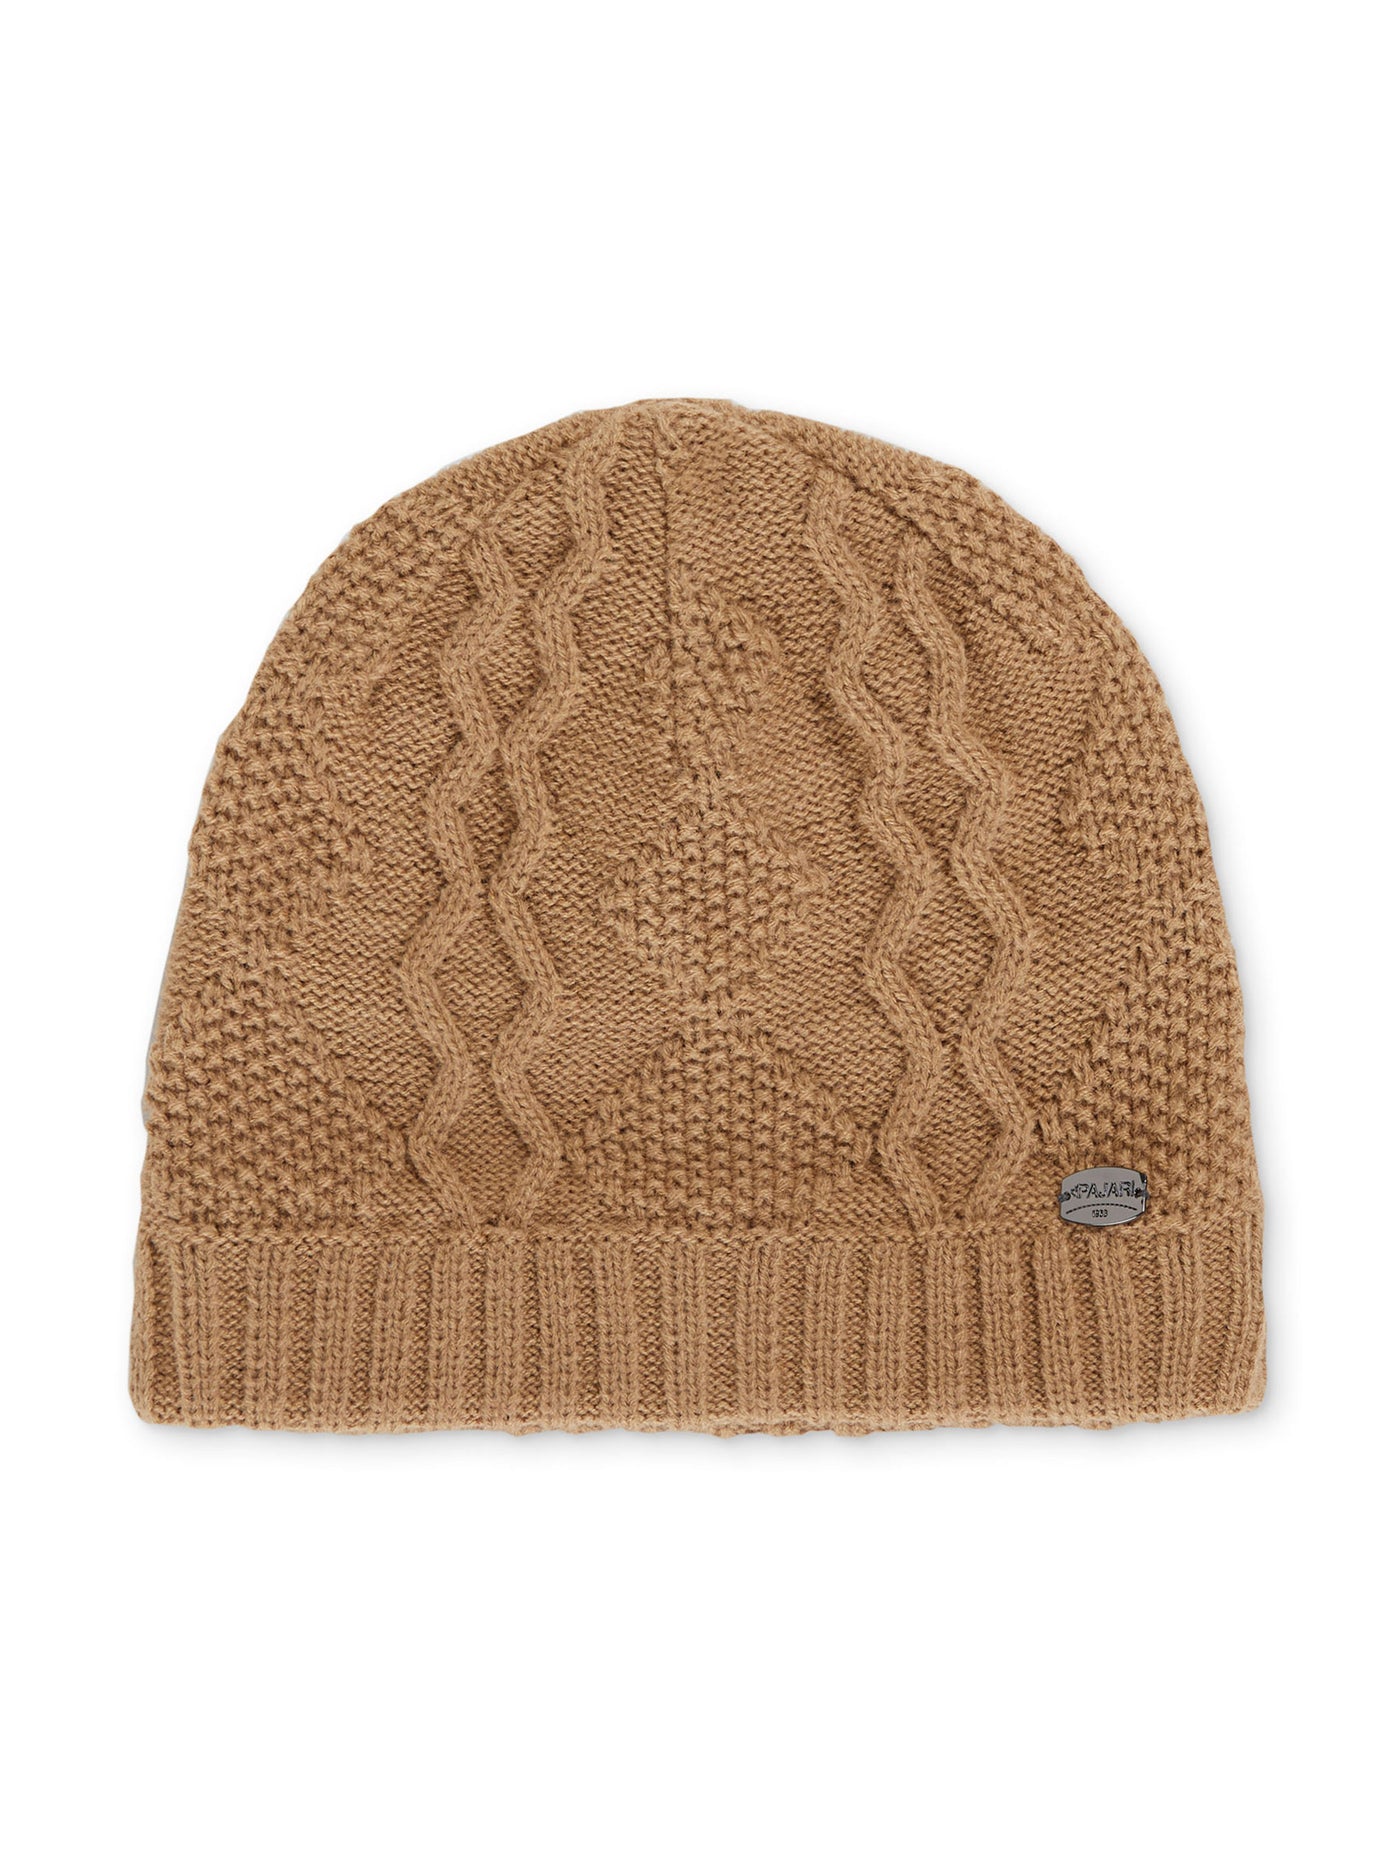 Mary Light Gauge Cable Knit Hat